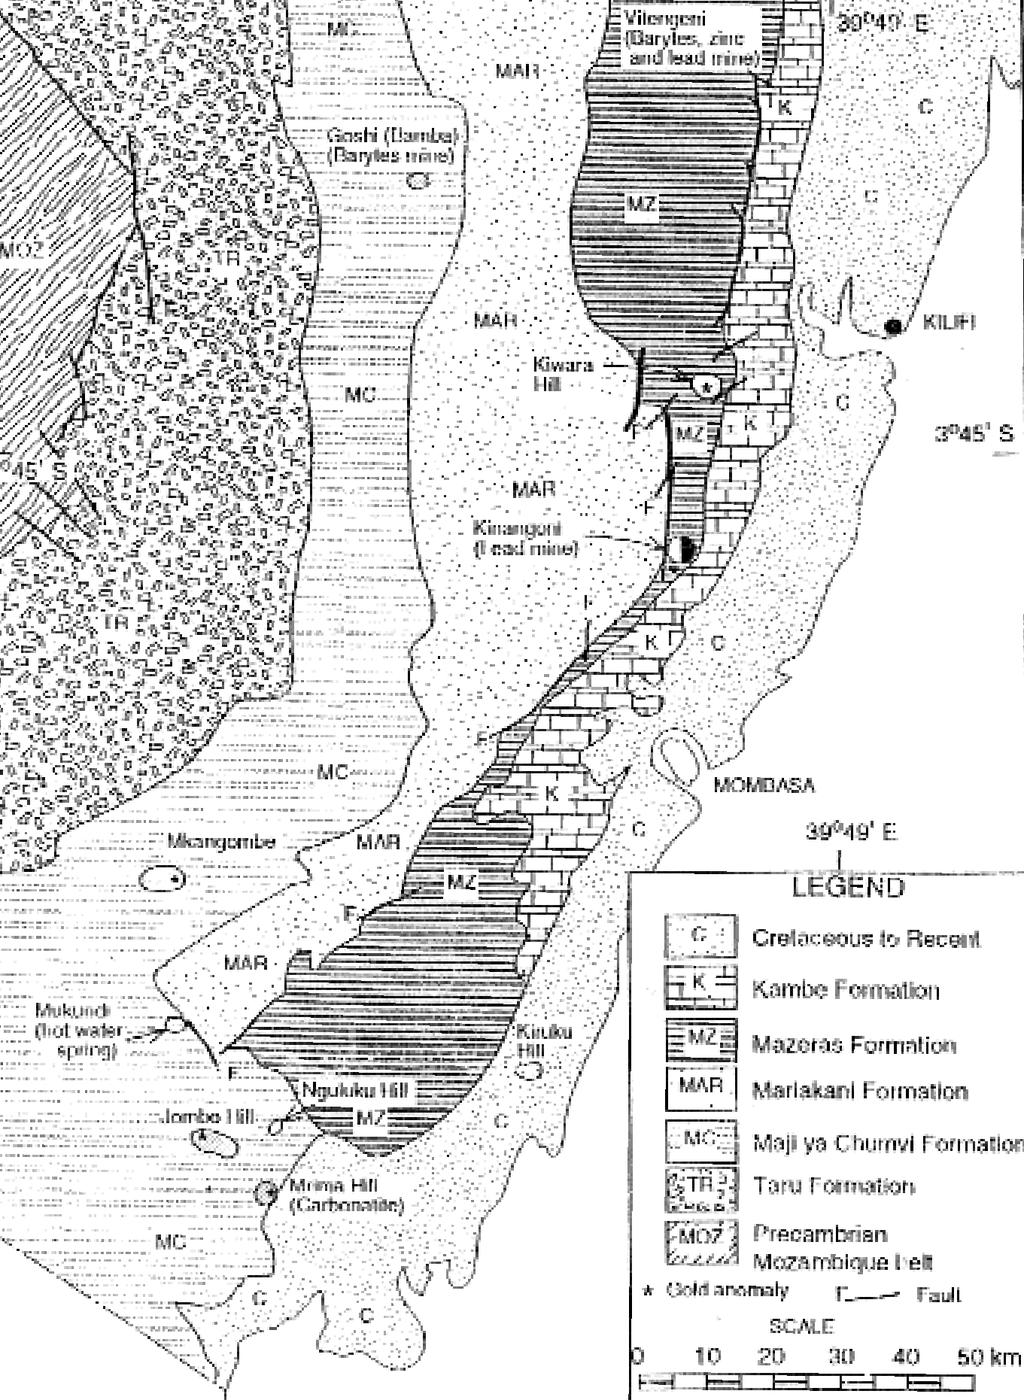 Map showing the general geology along the Kenyan coast, including major mineral